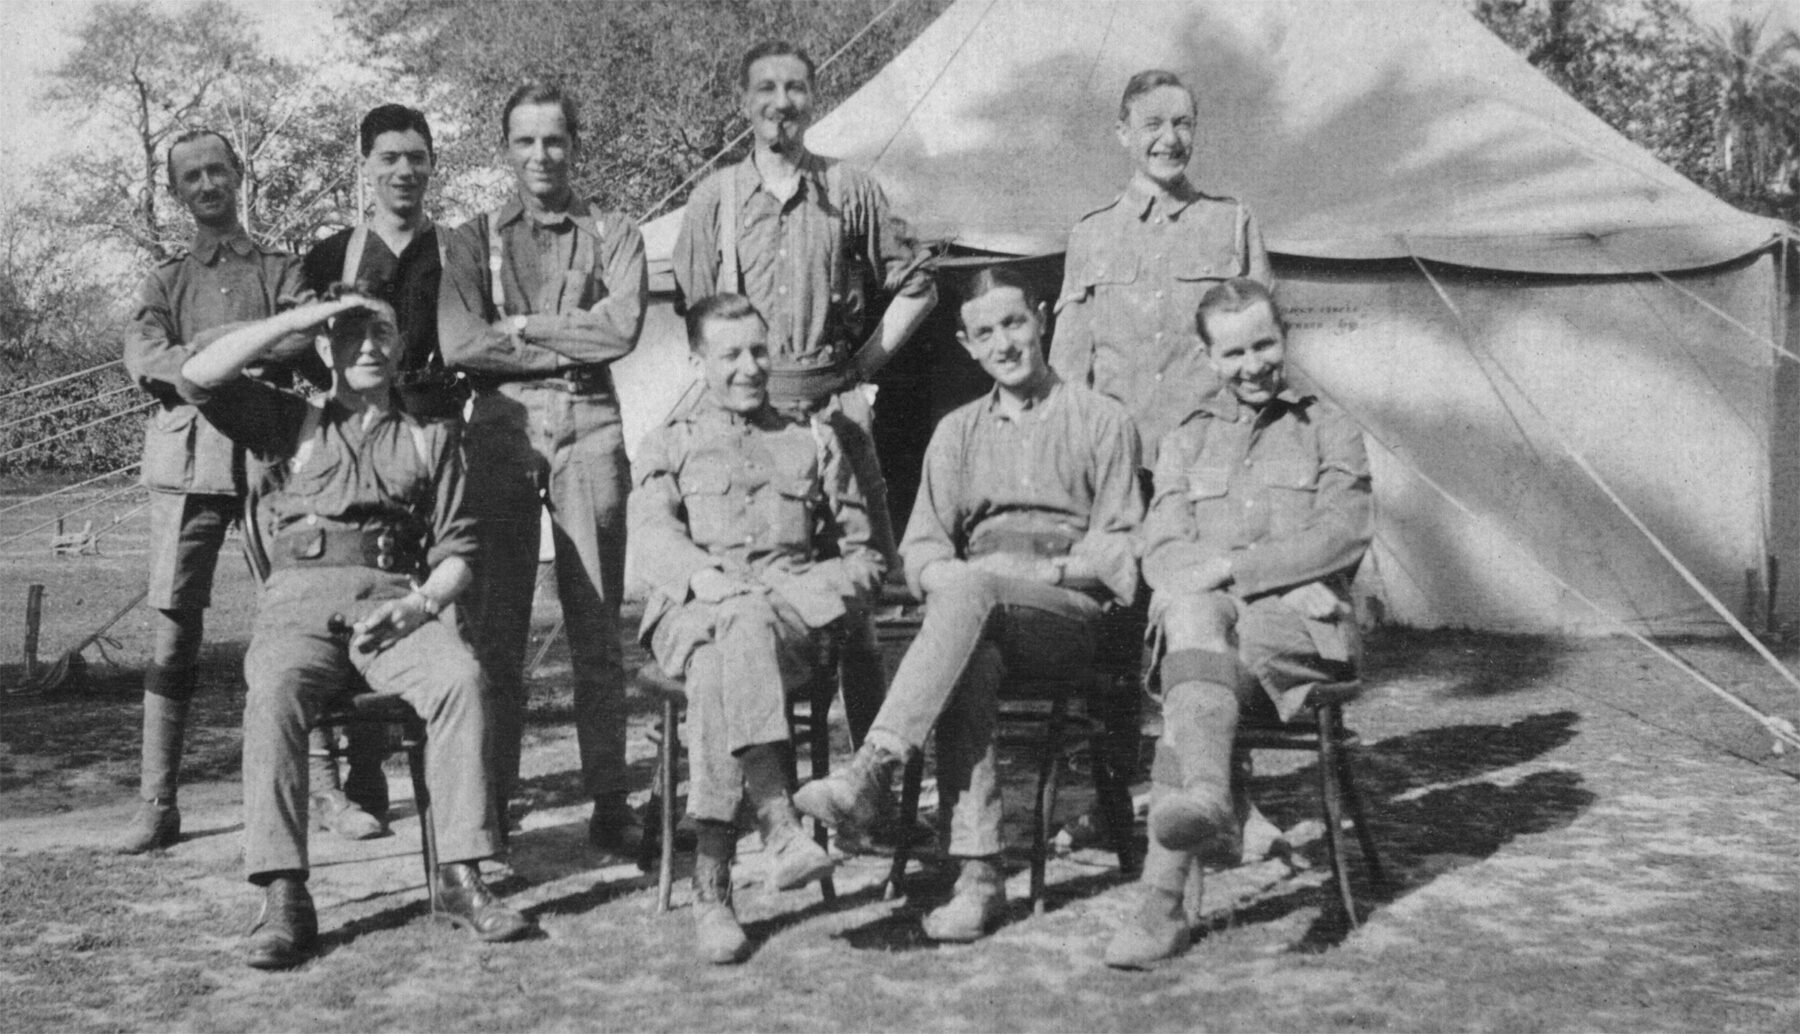 Gamps in India (seated, 2nd from right)